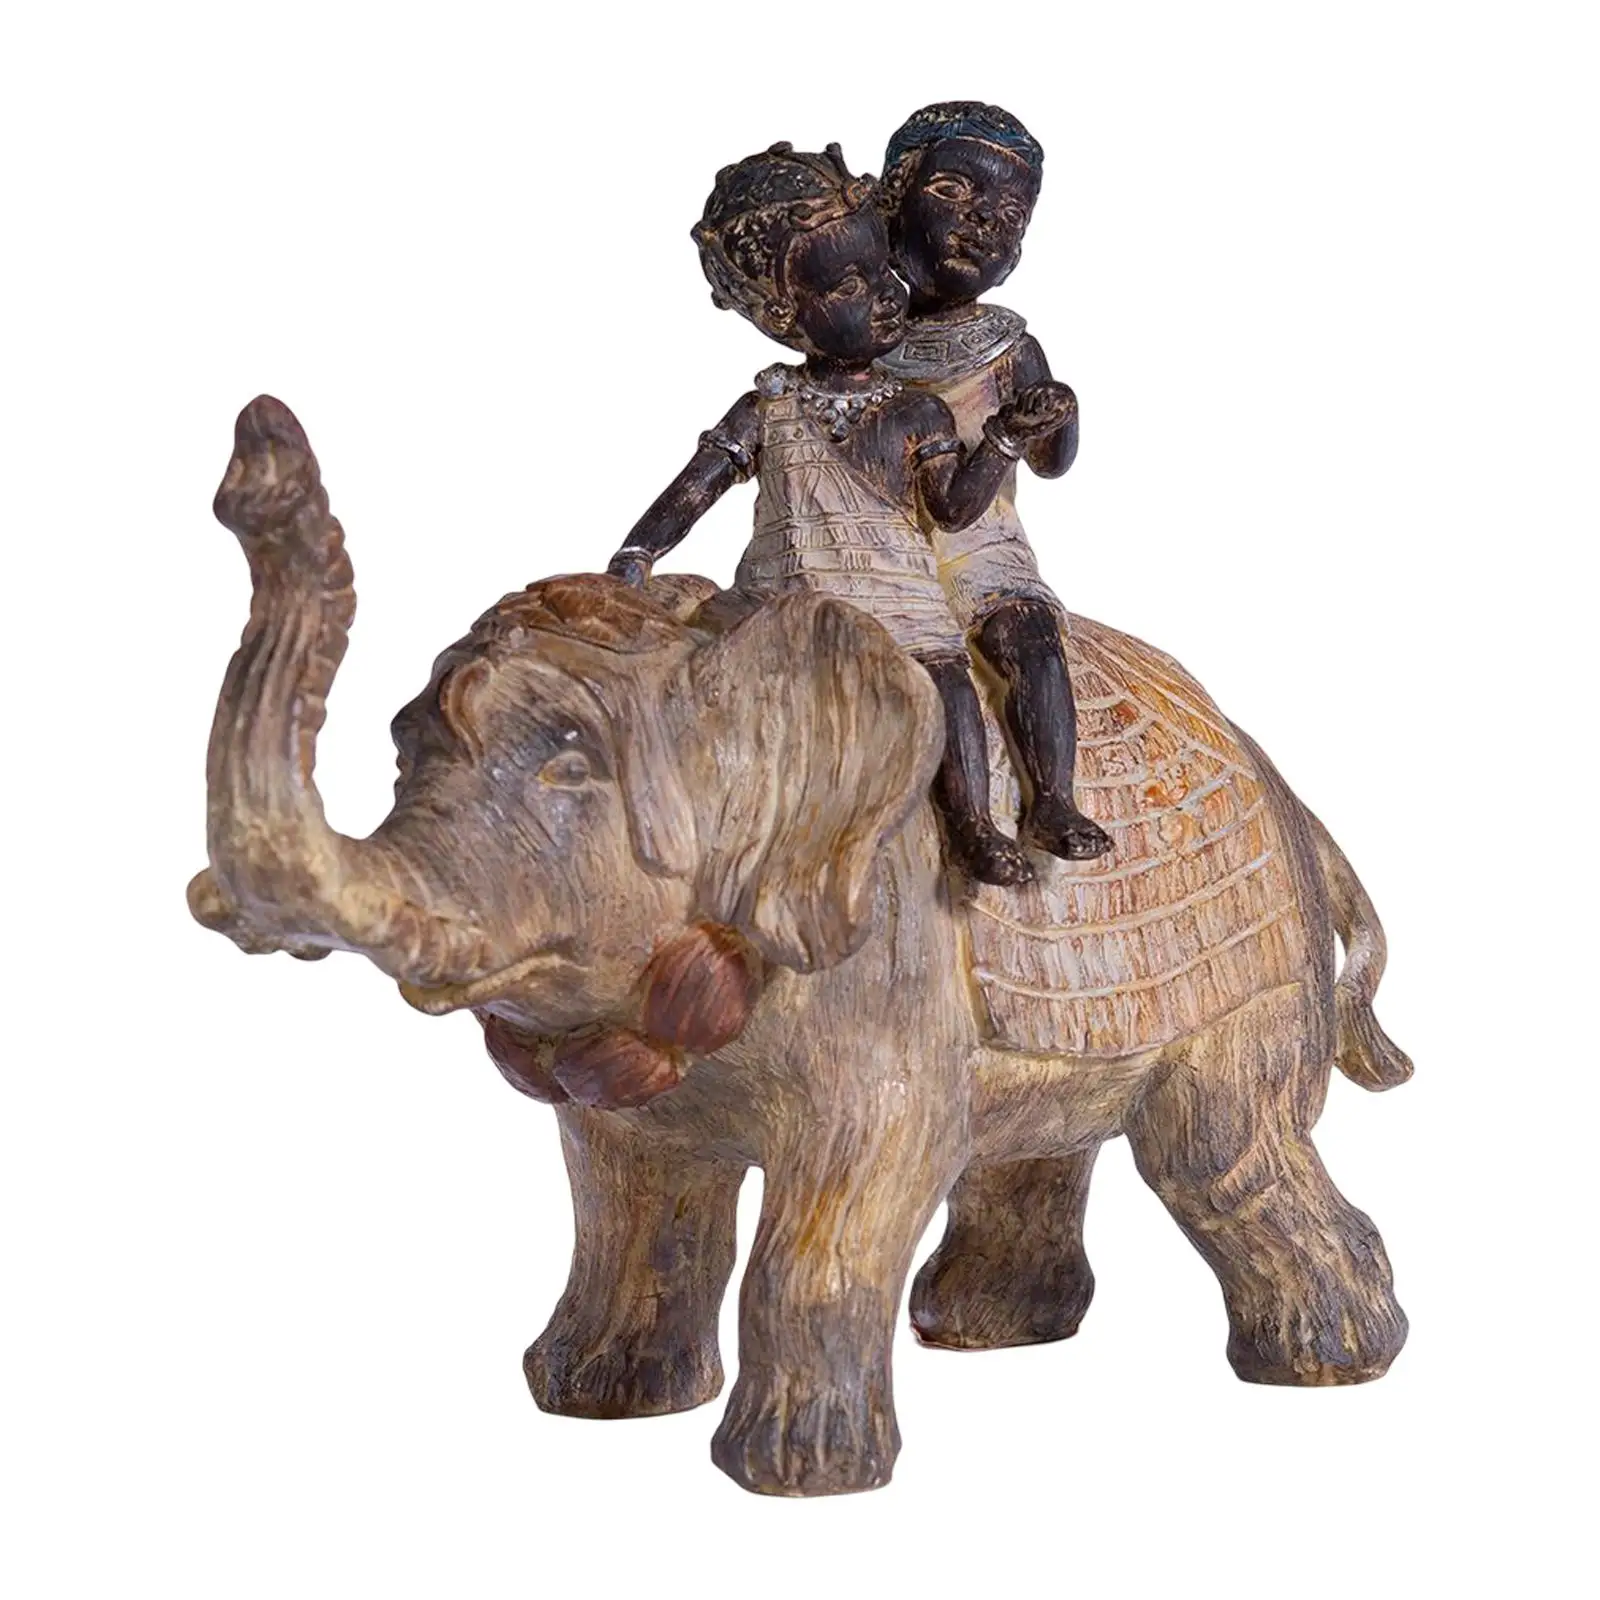 African Elephant Figurine Kids Statue Animal Sculpture Collections Crafts for TV Cabinet Bookshelf Tabletop Decoration Ornament